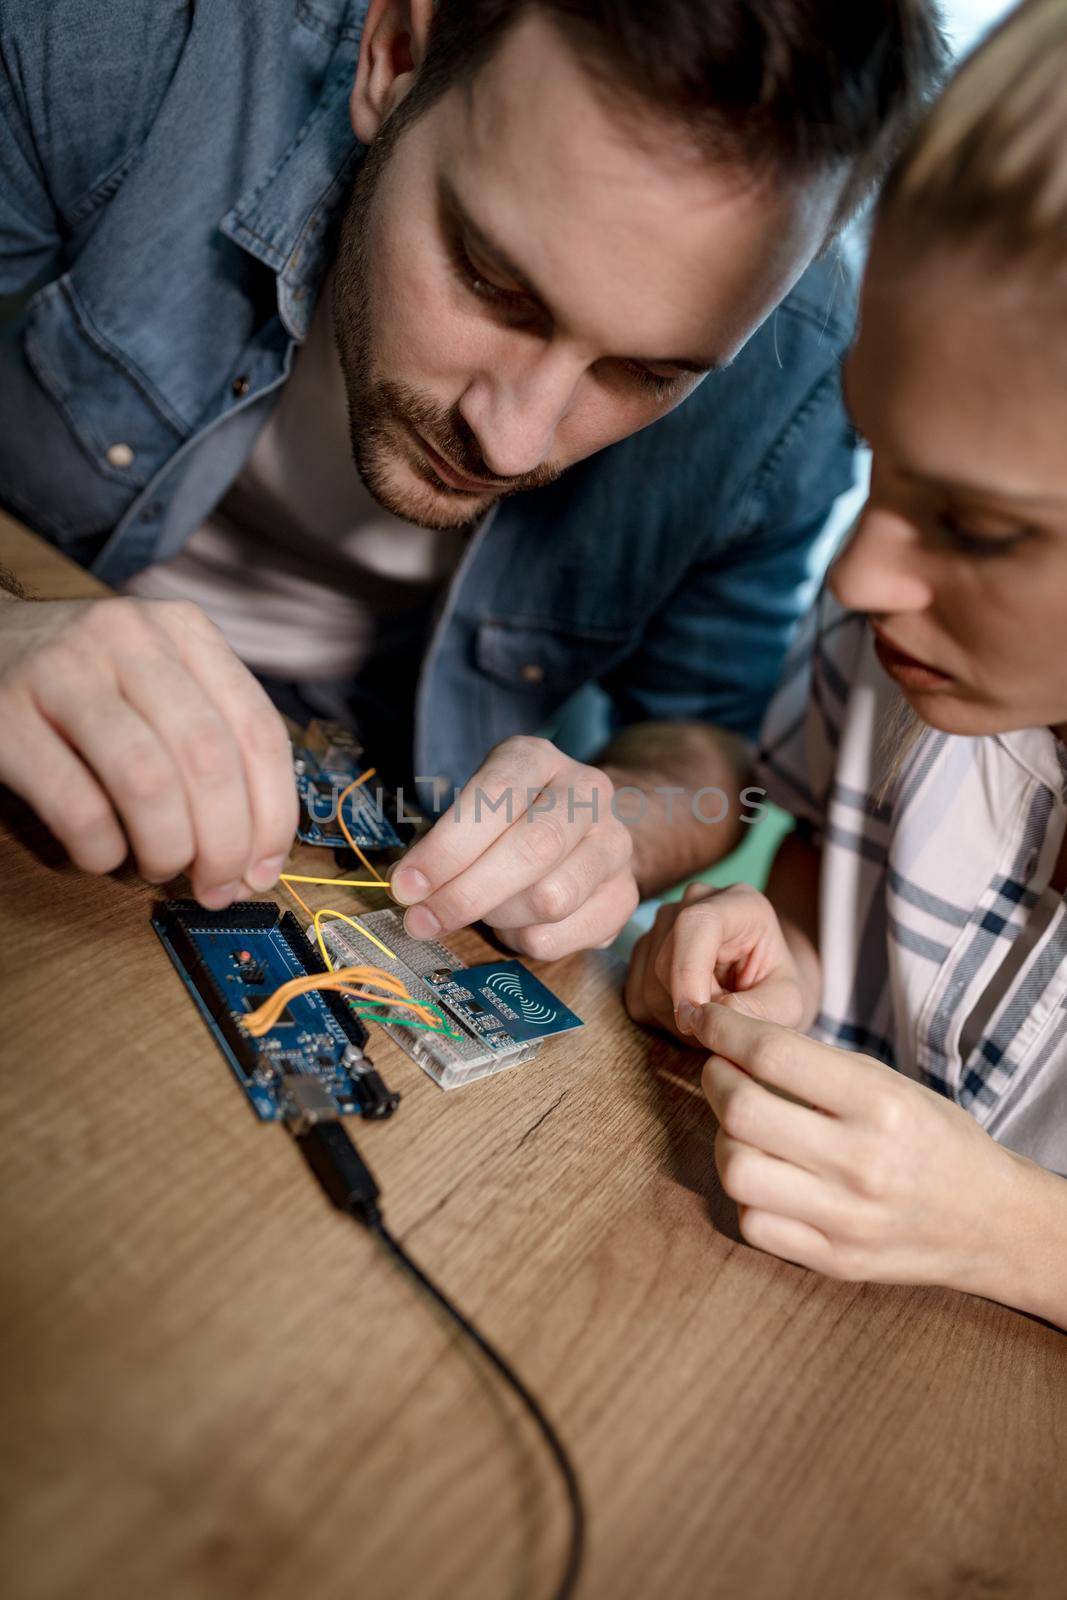 Two young colleagues technician focused on the repair of electronic equipment.